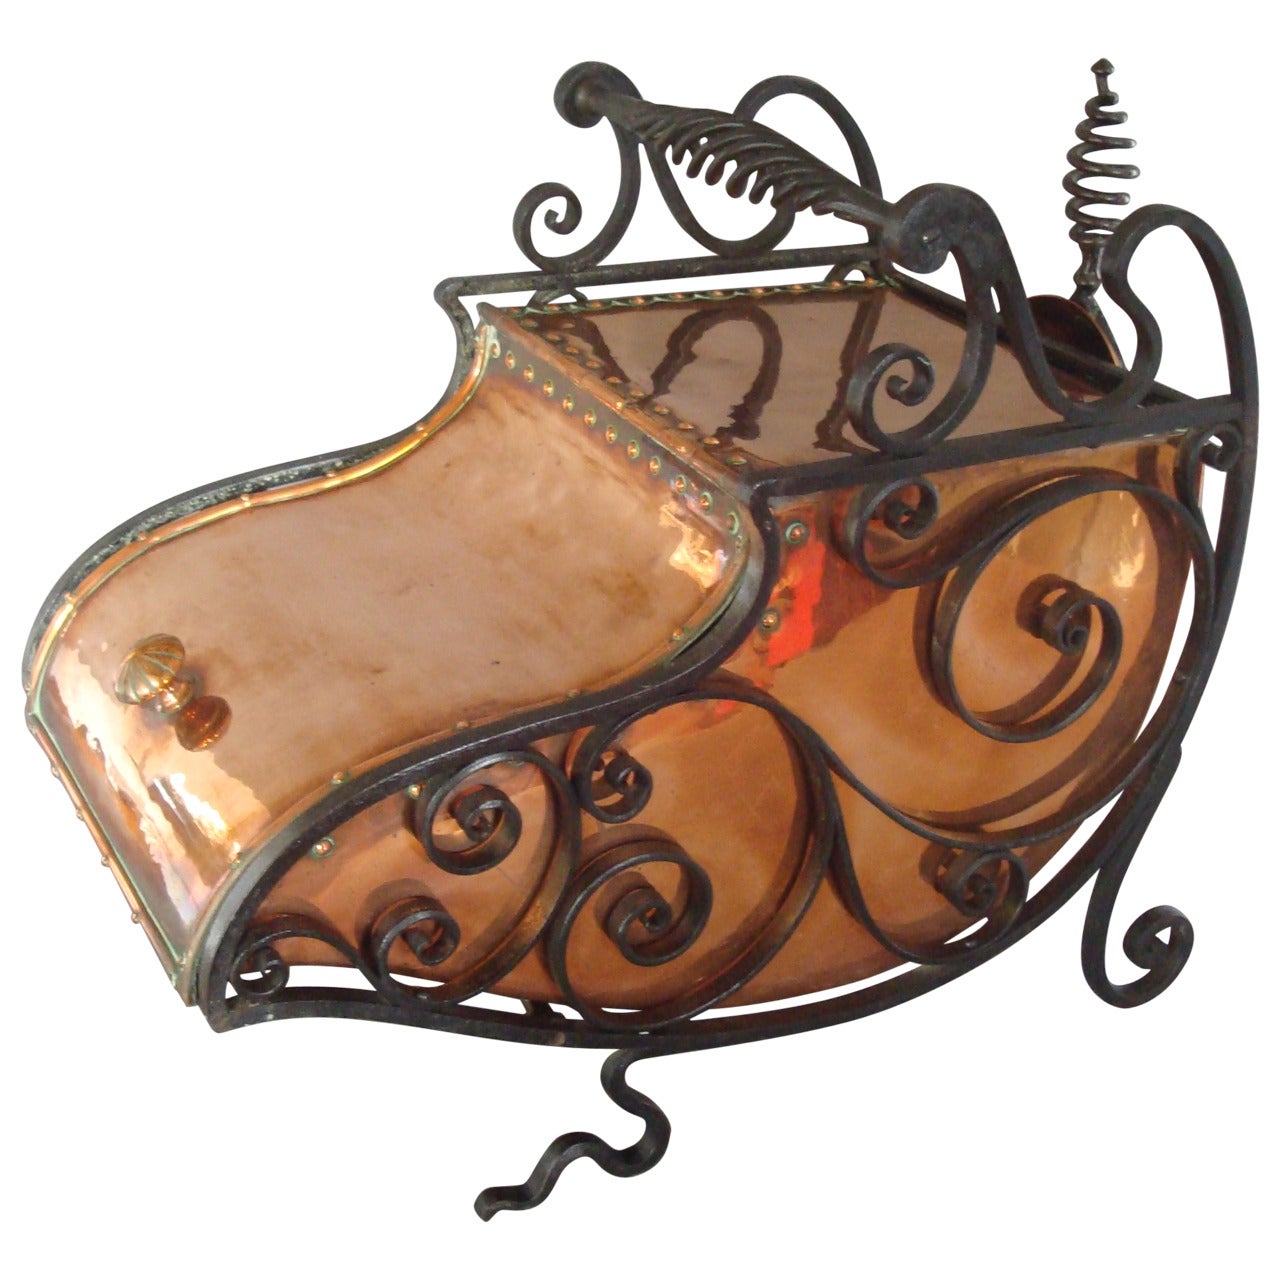 Large 19th Century Arts and Crafts Copper and Iron Purdonium or Coal Scuttle For Sale